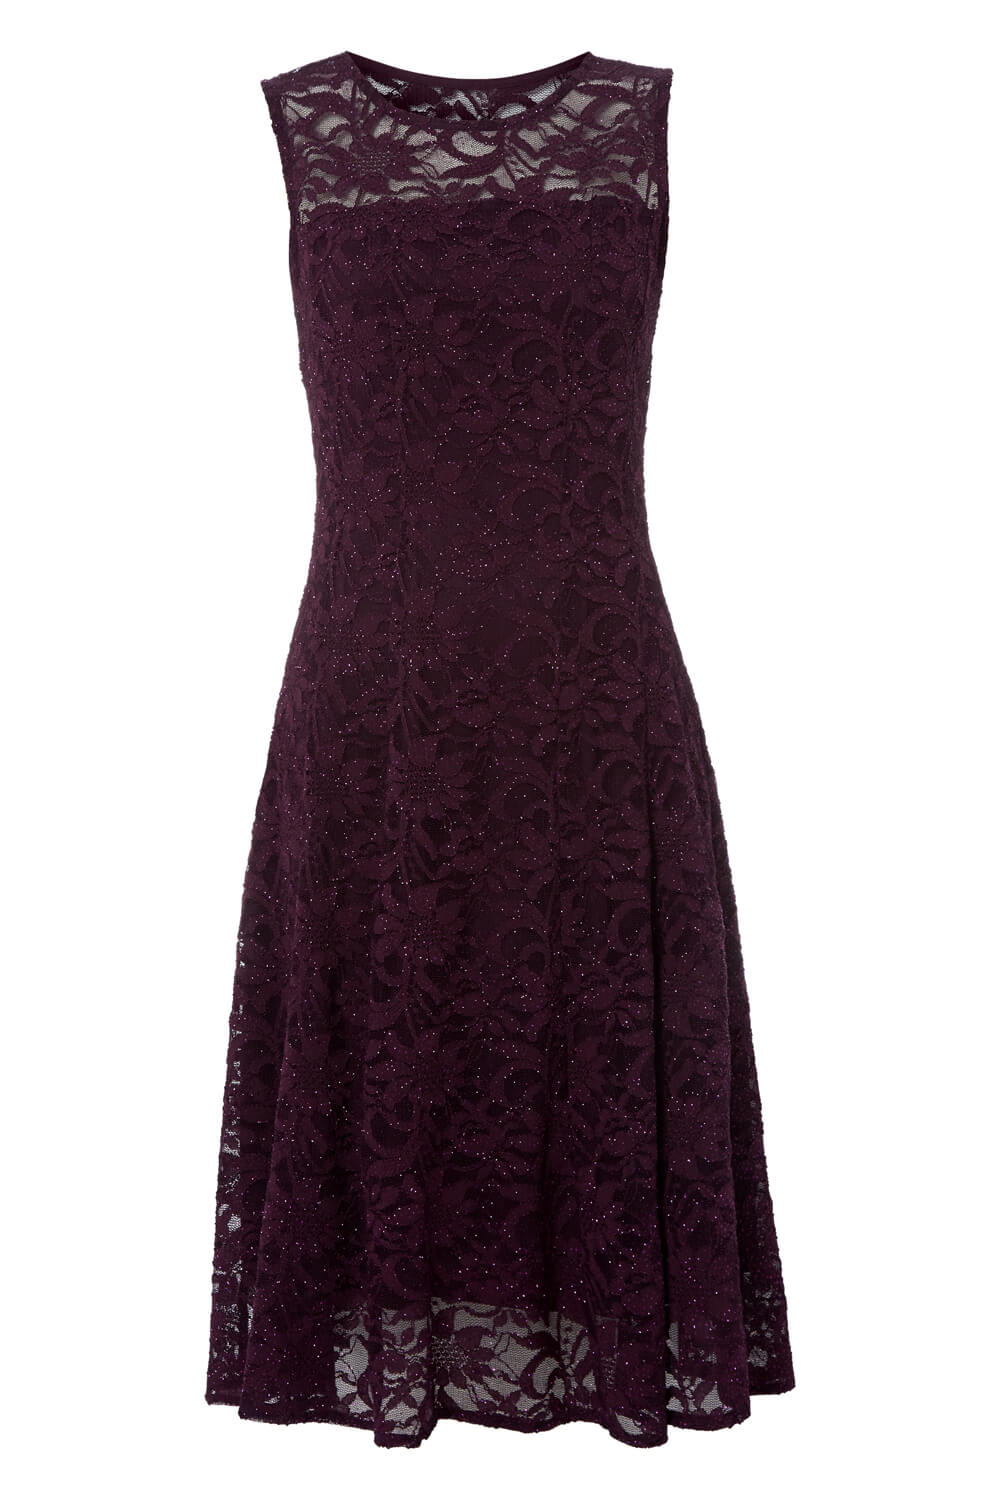 Purple Lace Fit and Flare Dress, Image 4 of 4